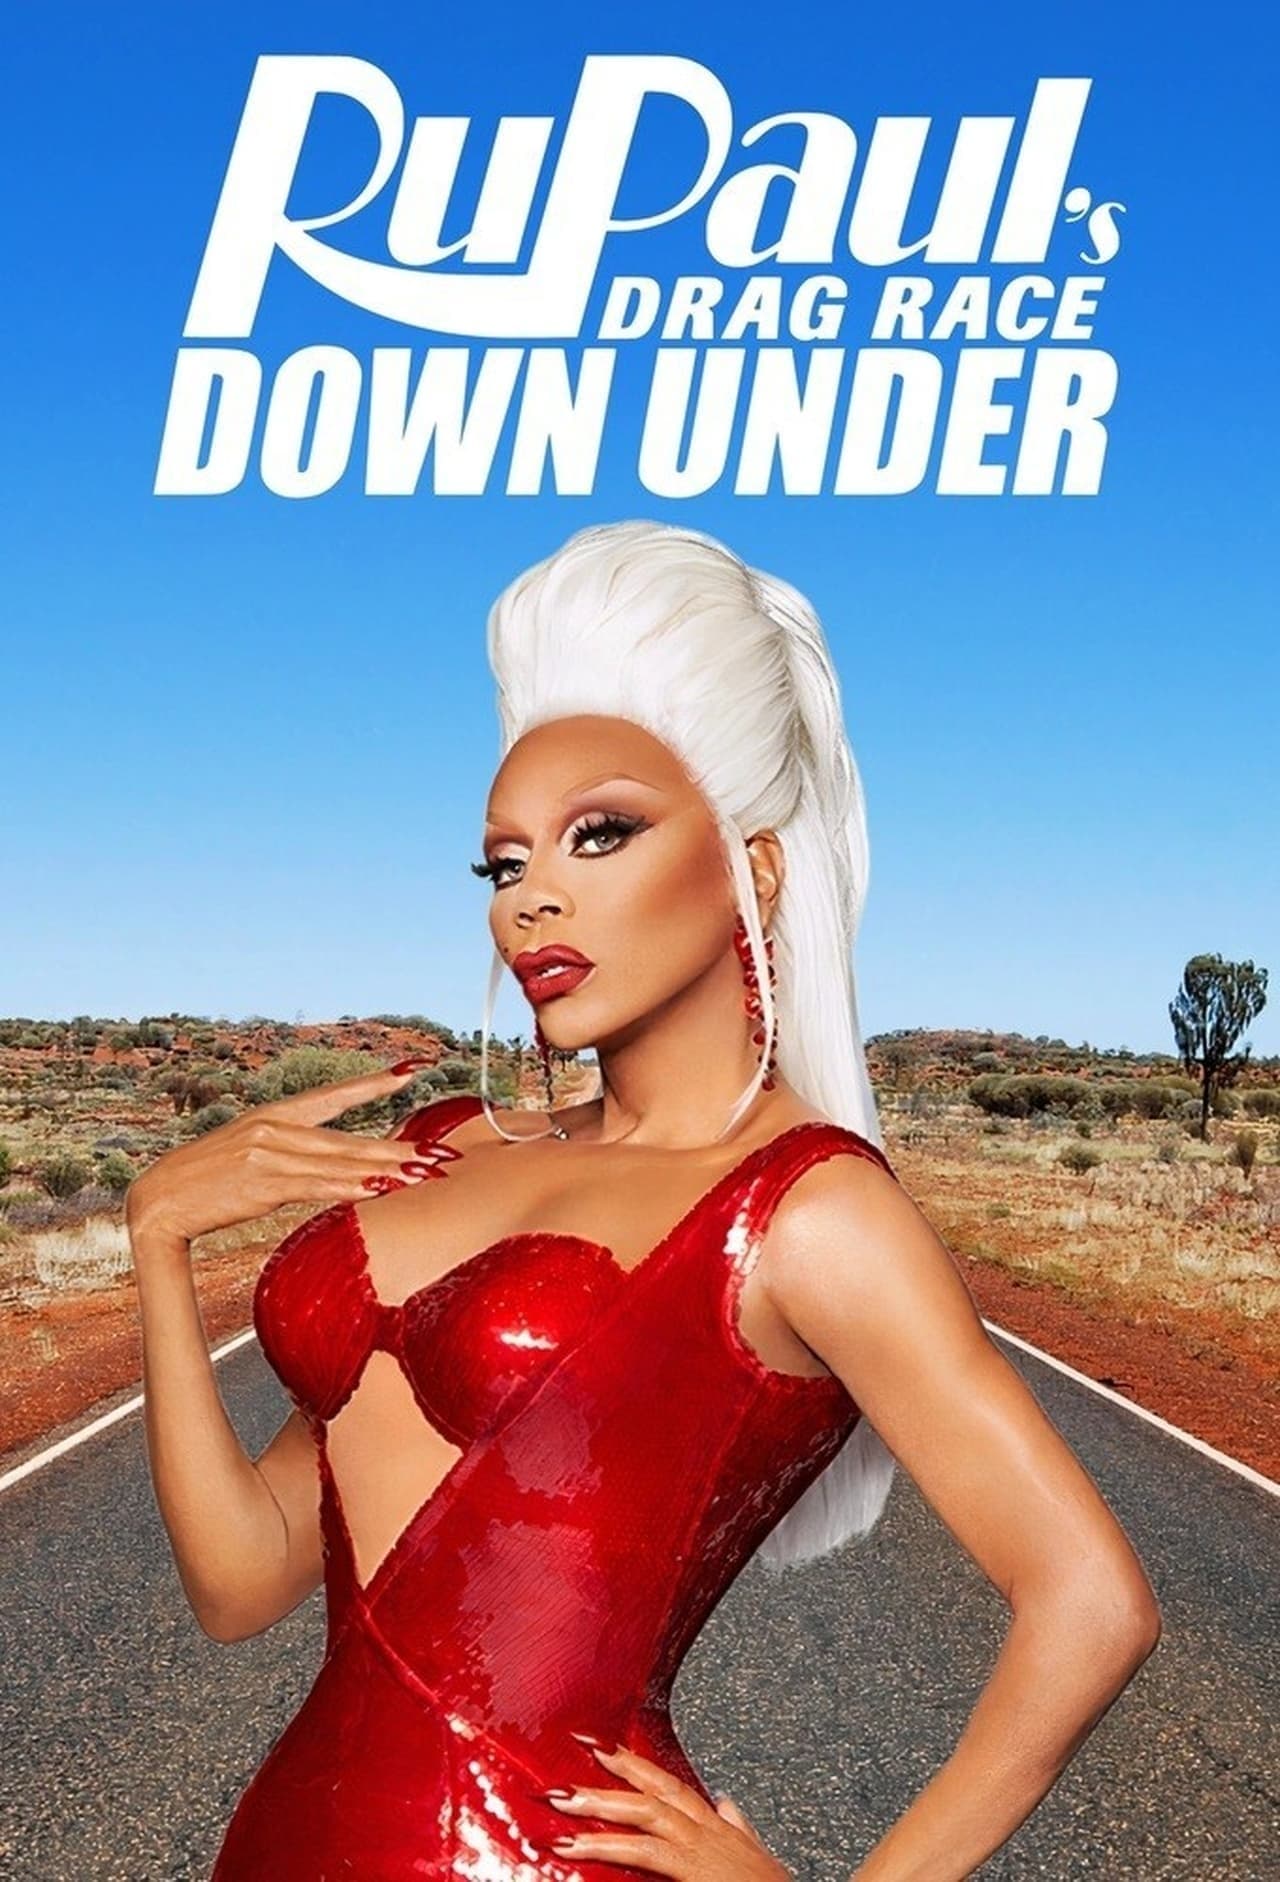 RuPaul's Drag Race Down Under TV Shows About Gay Interest